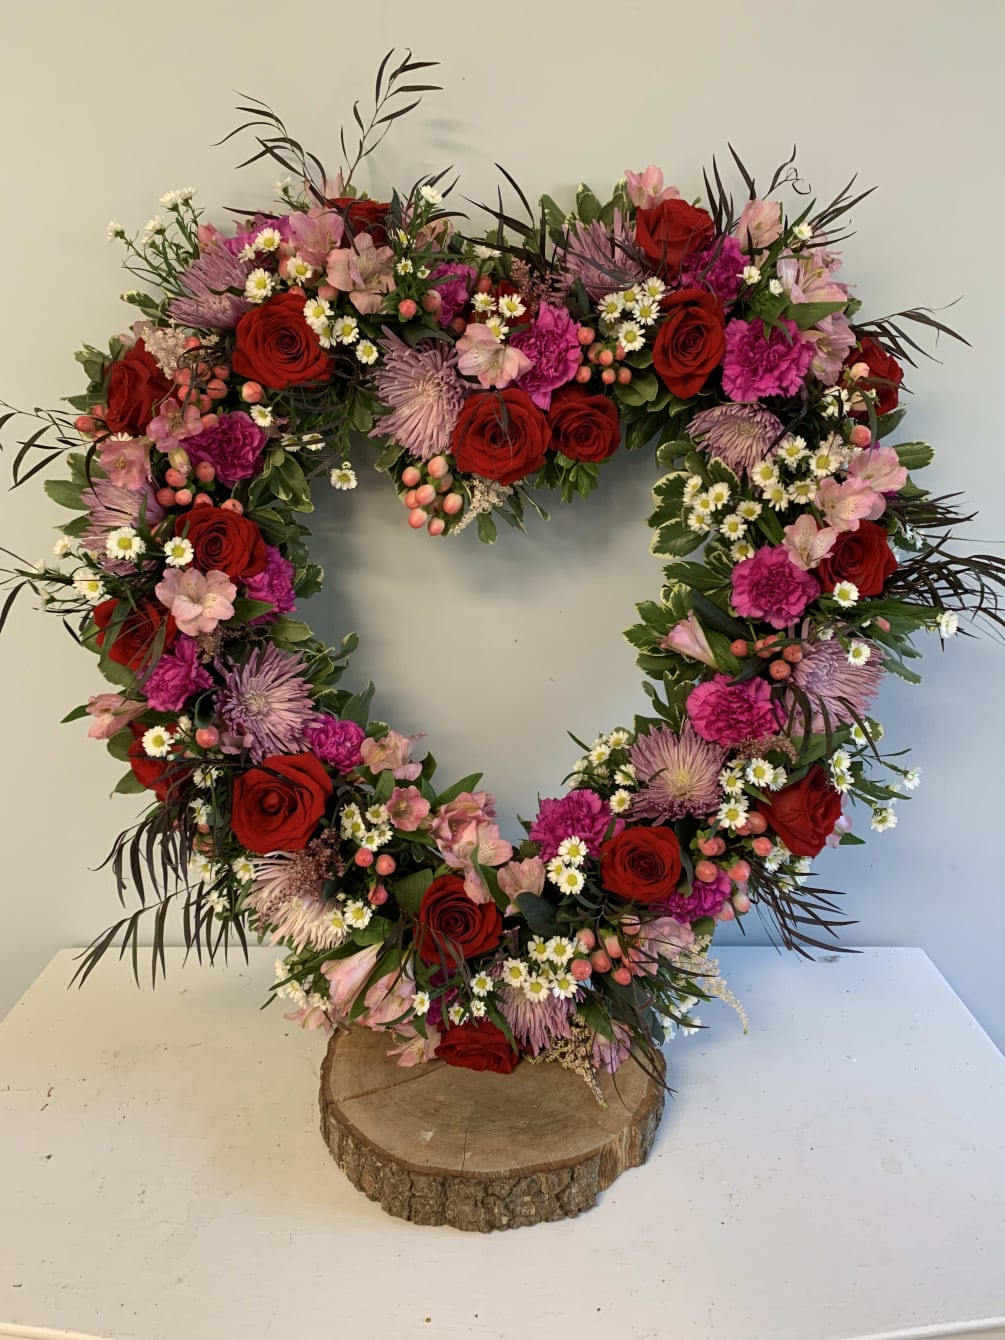 This large open heart wreath is filled with purple,red,pink flowers